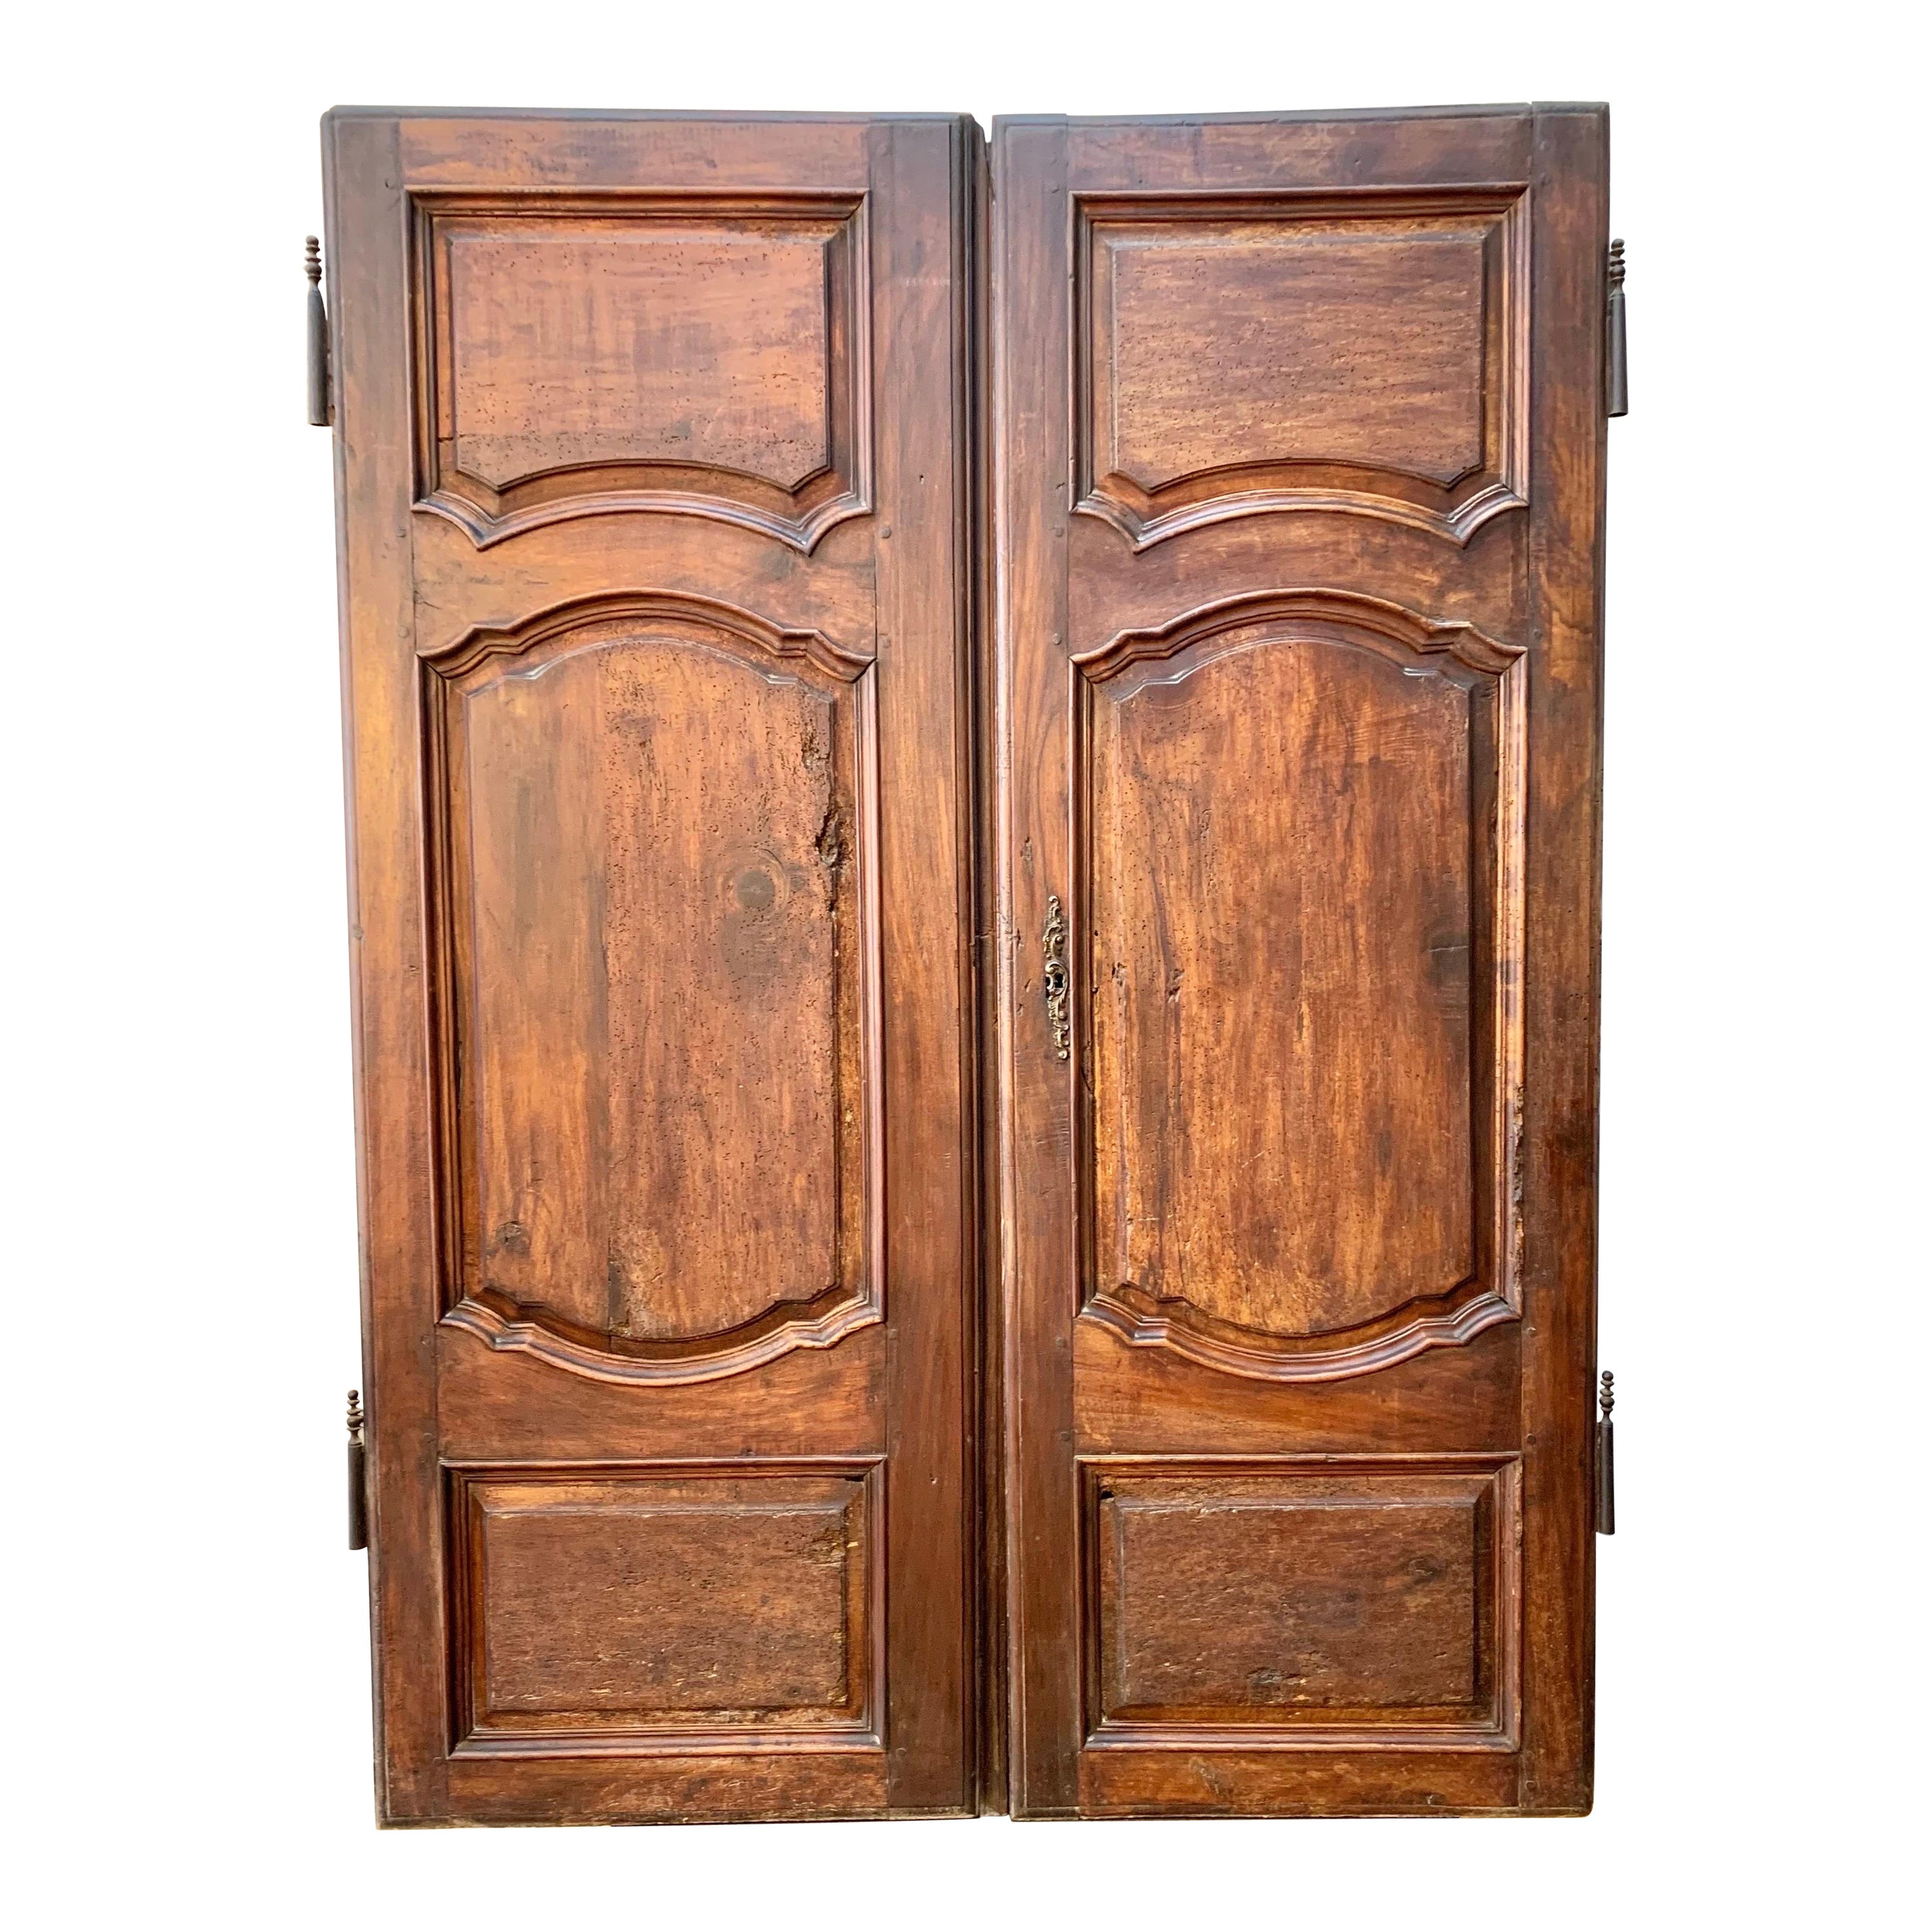 19th Century French Armoire Doors - a Pair For Sale